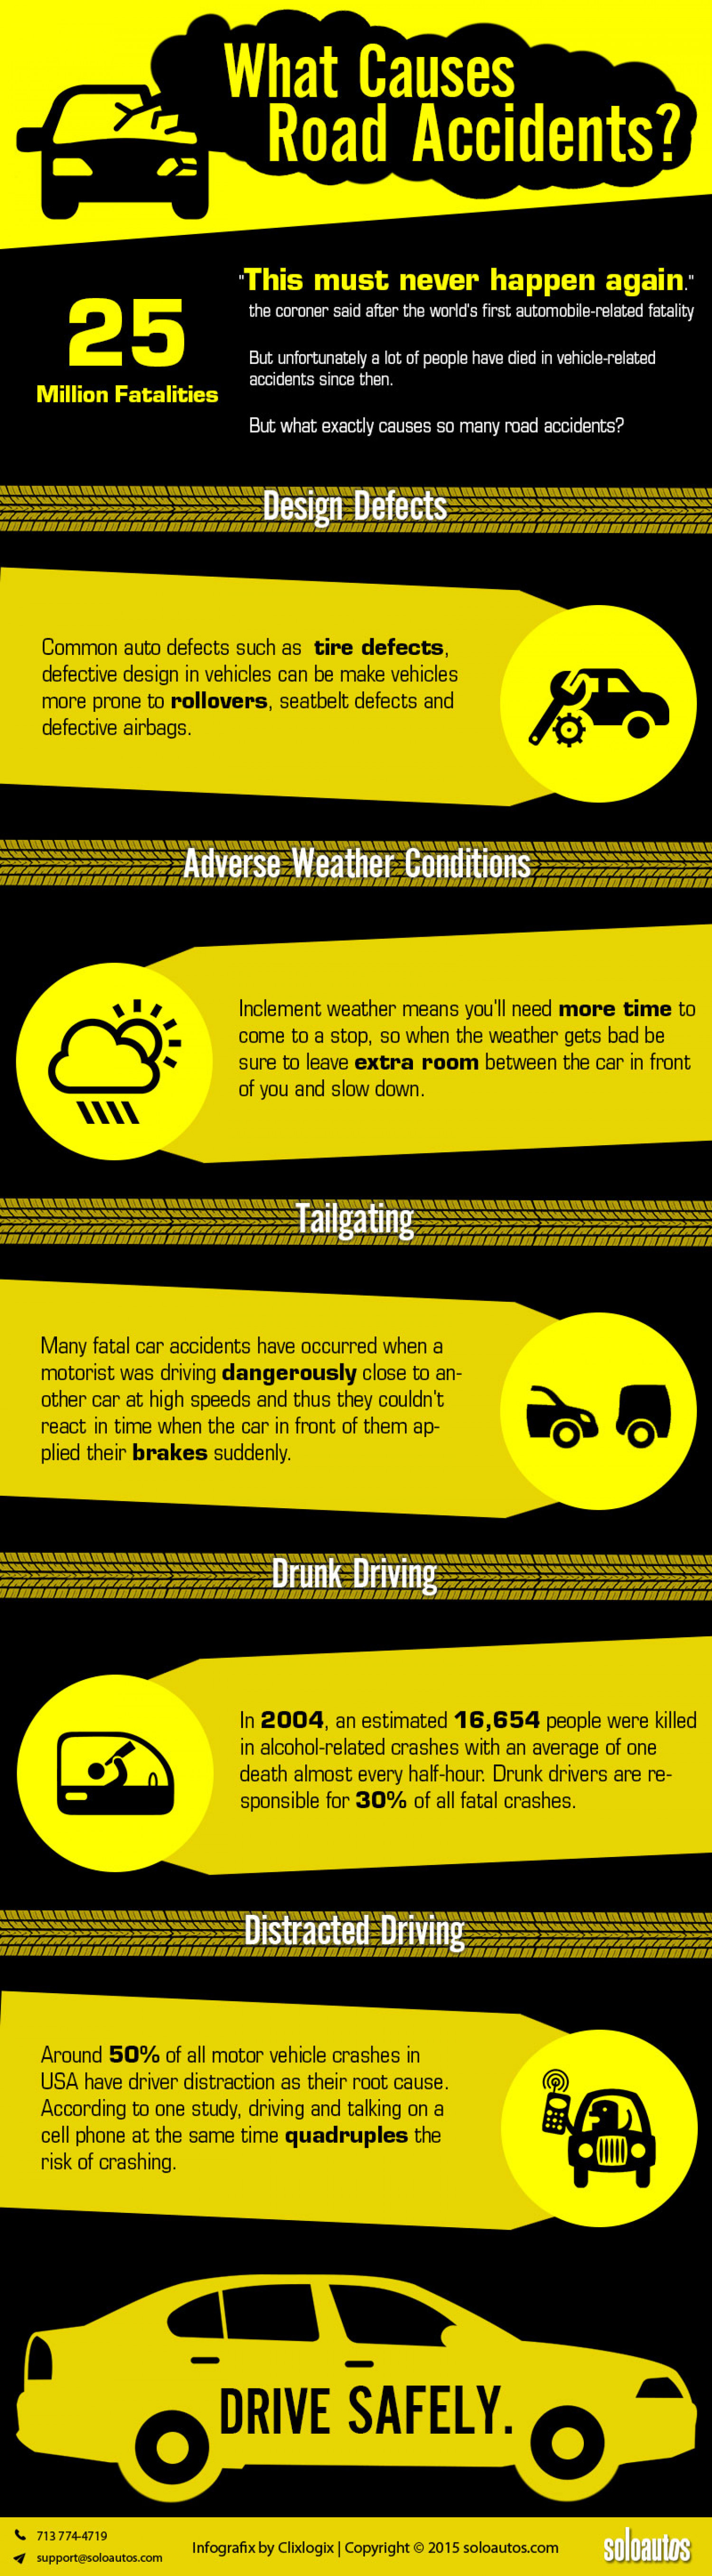 What Causes Road Accidents? Infographic